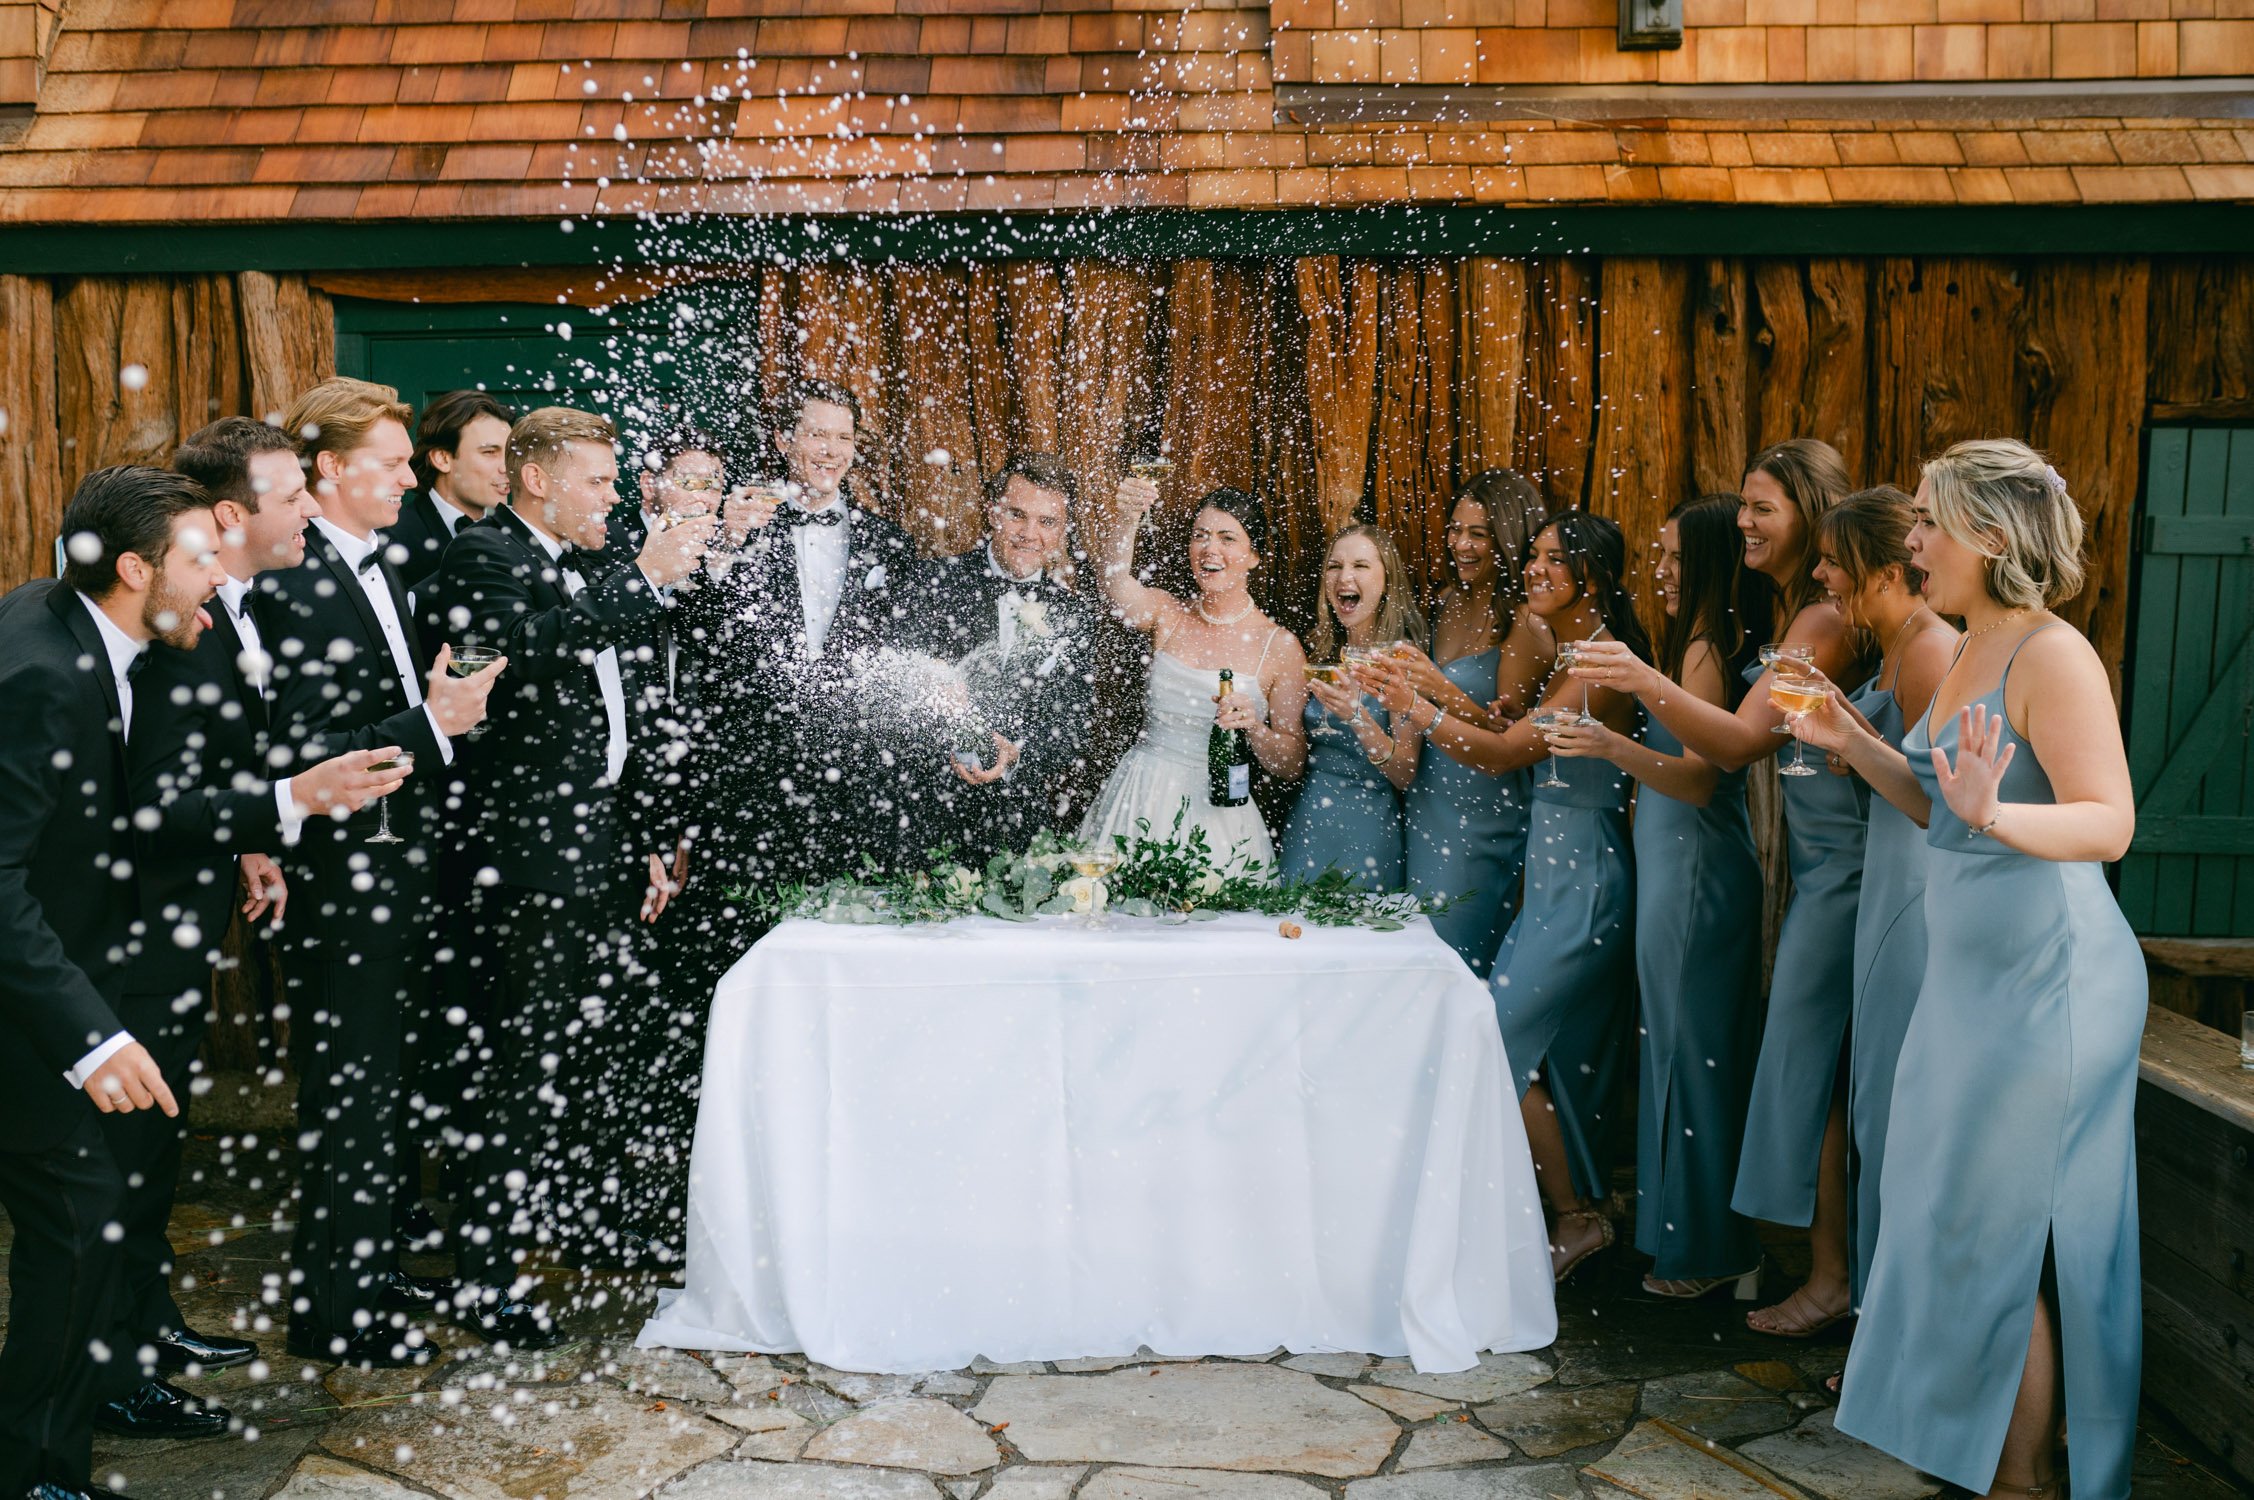 Valhalla Lake Tahoe wedding, photo of the newly wed couple spraying the champagne with their wedding party